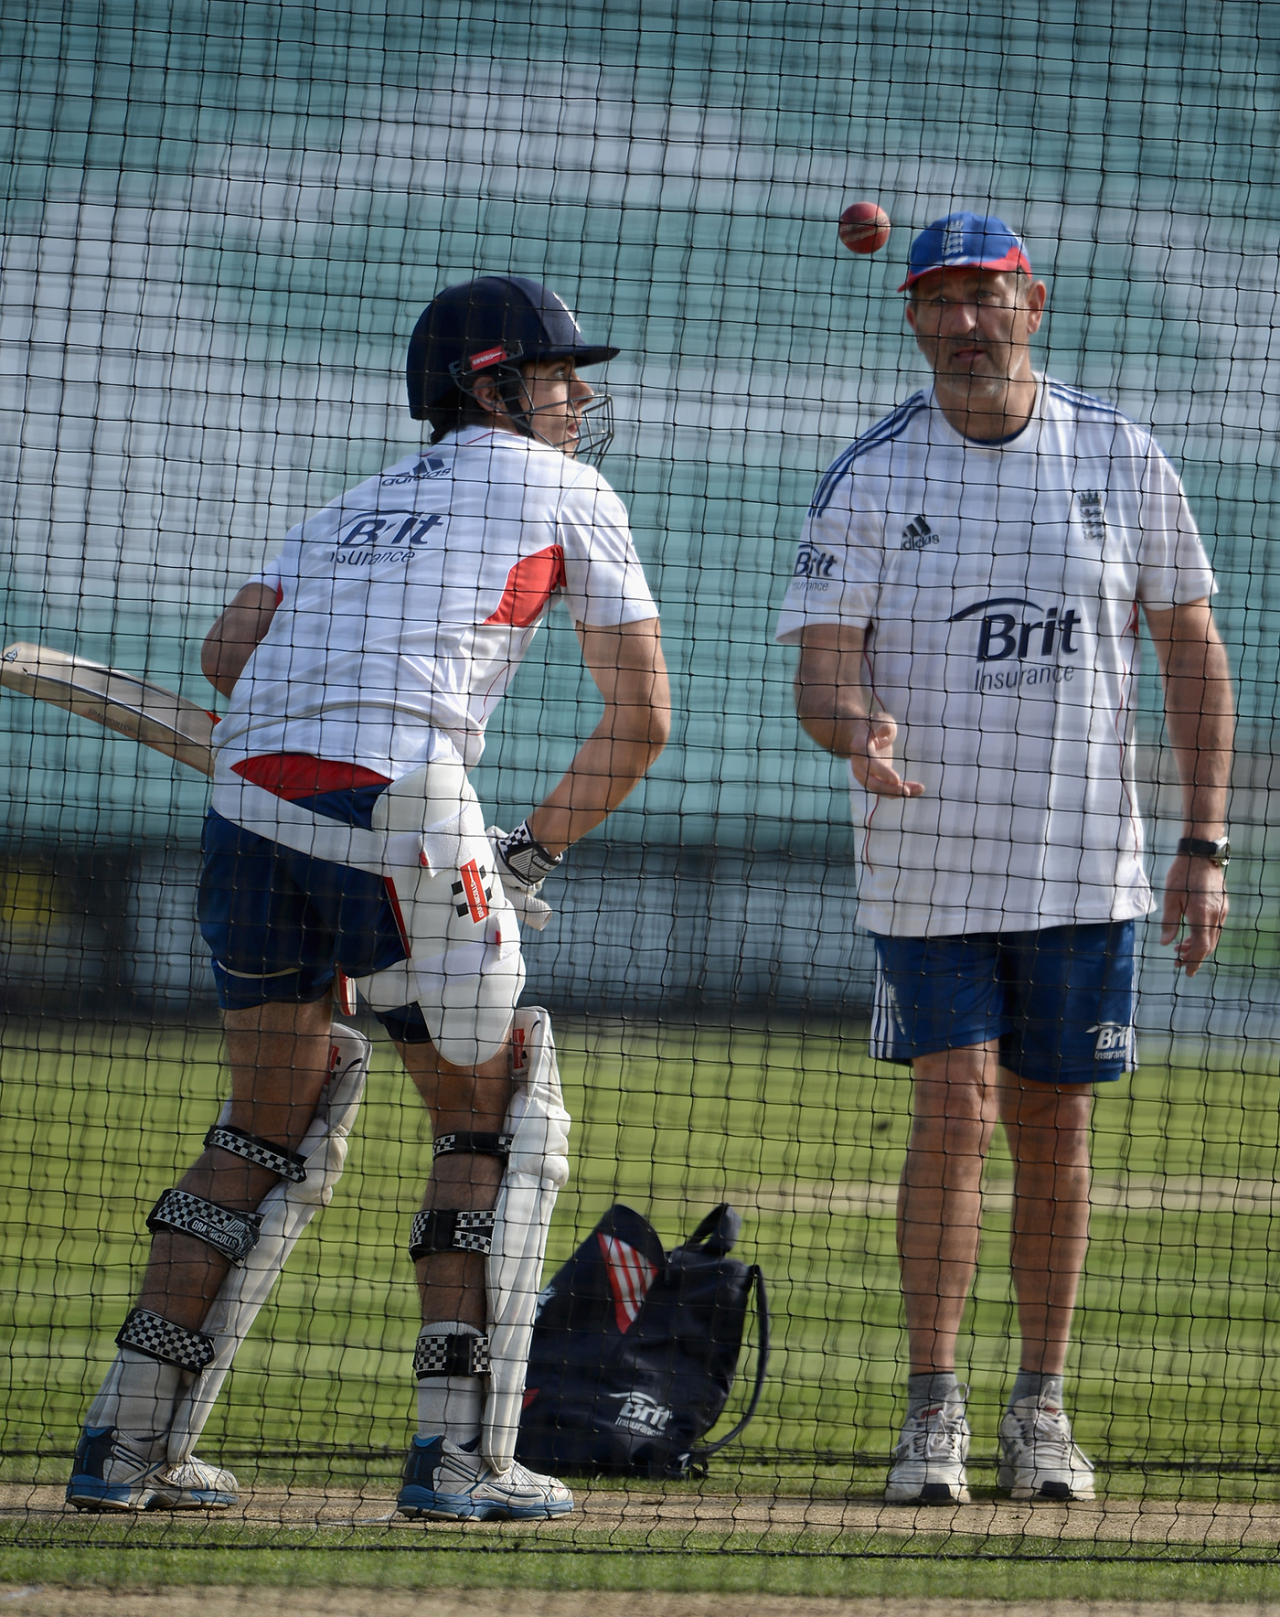 Alastair Cook and Graham Gooch in the nets, August 8, 2013